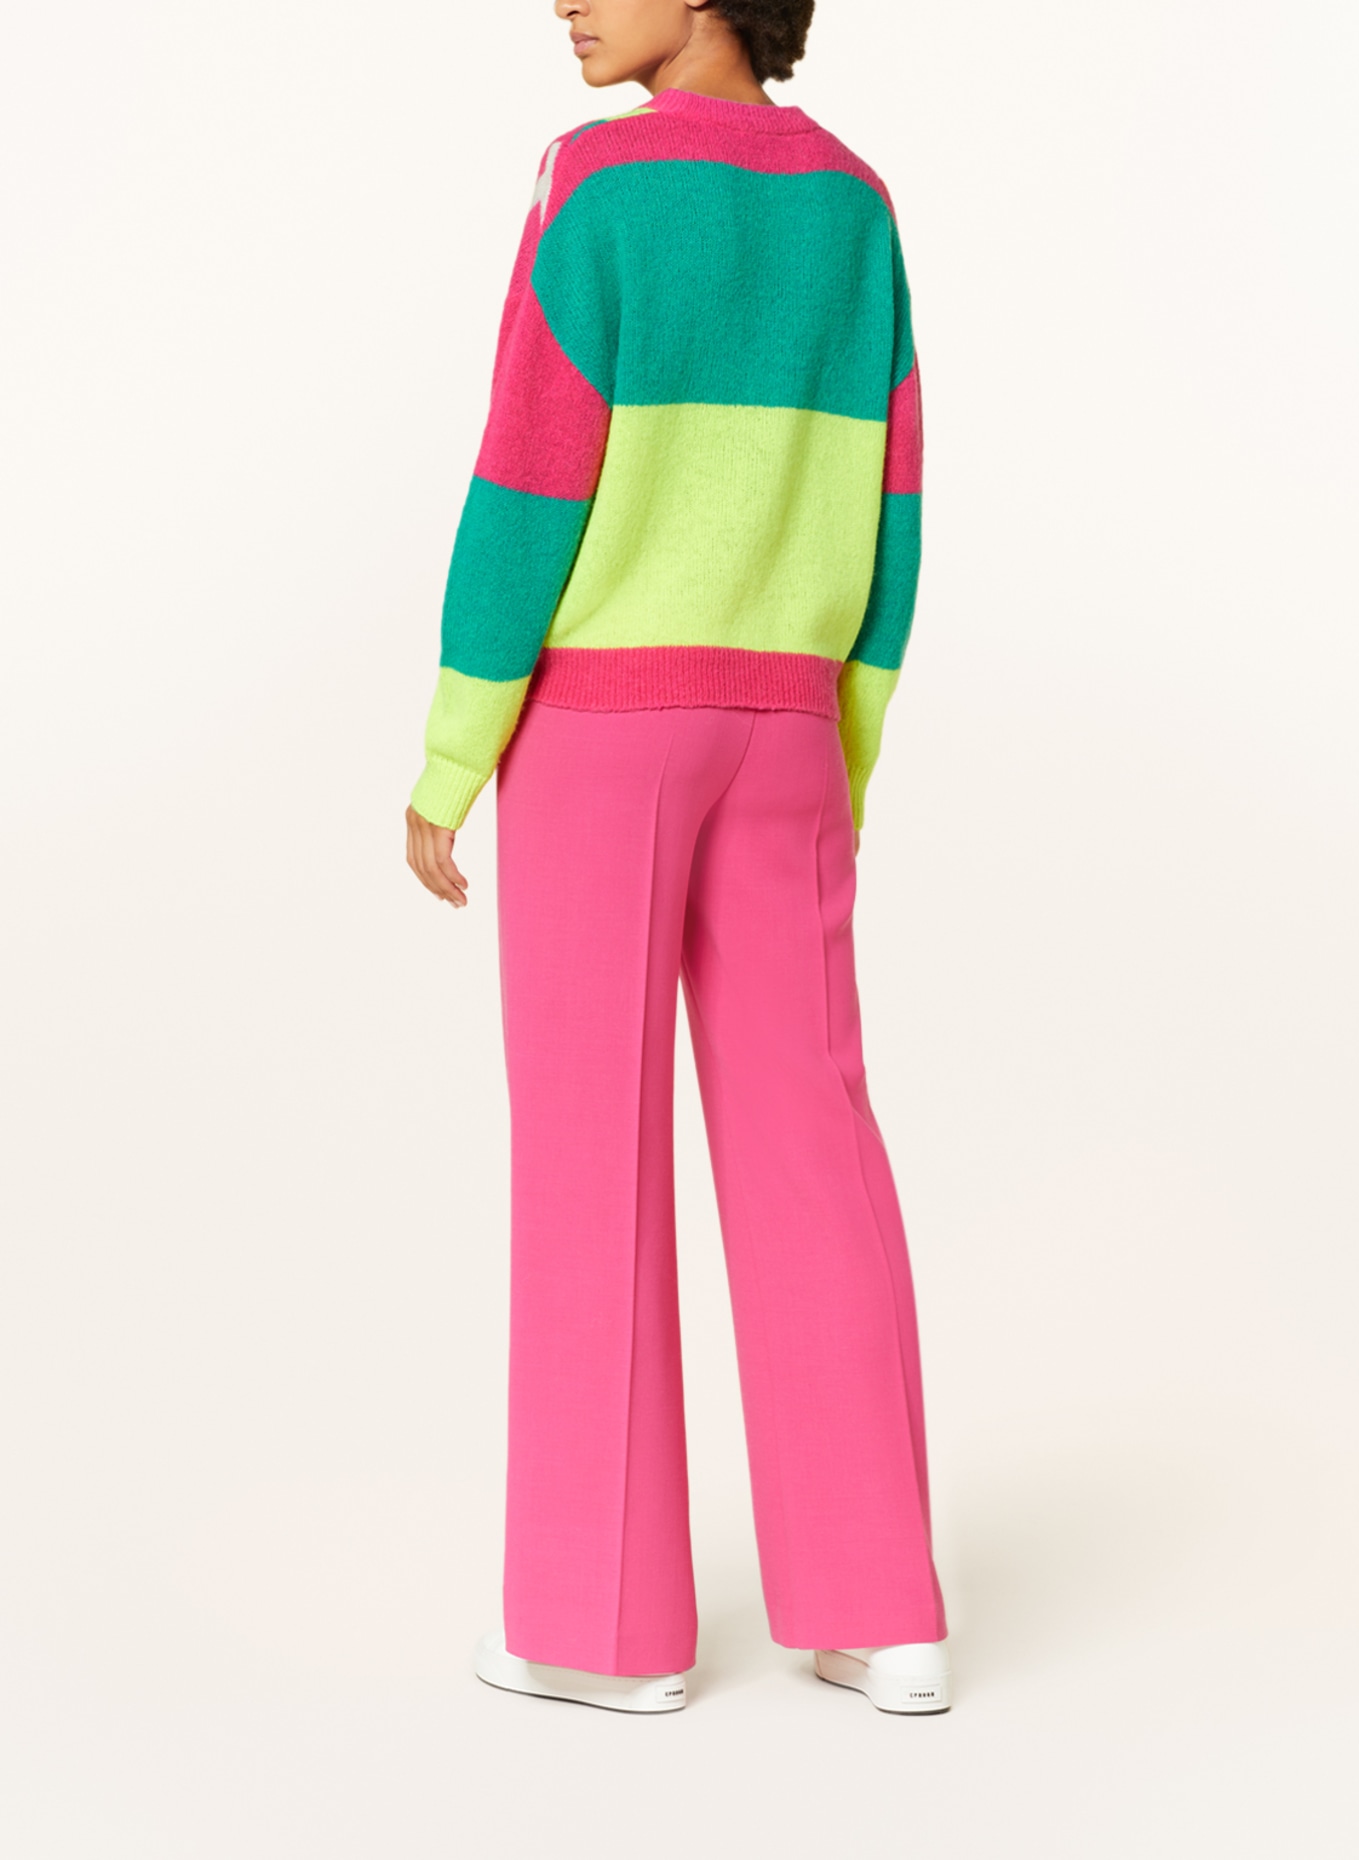 Princess GOES HOLLYWOOD Oversized sweater with merino wool and decorative gems, Color: PINK/ ORANGE/ YELLOW (Image 3)